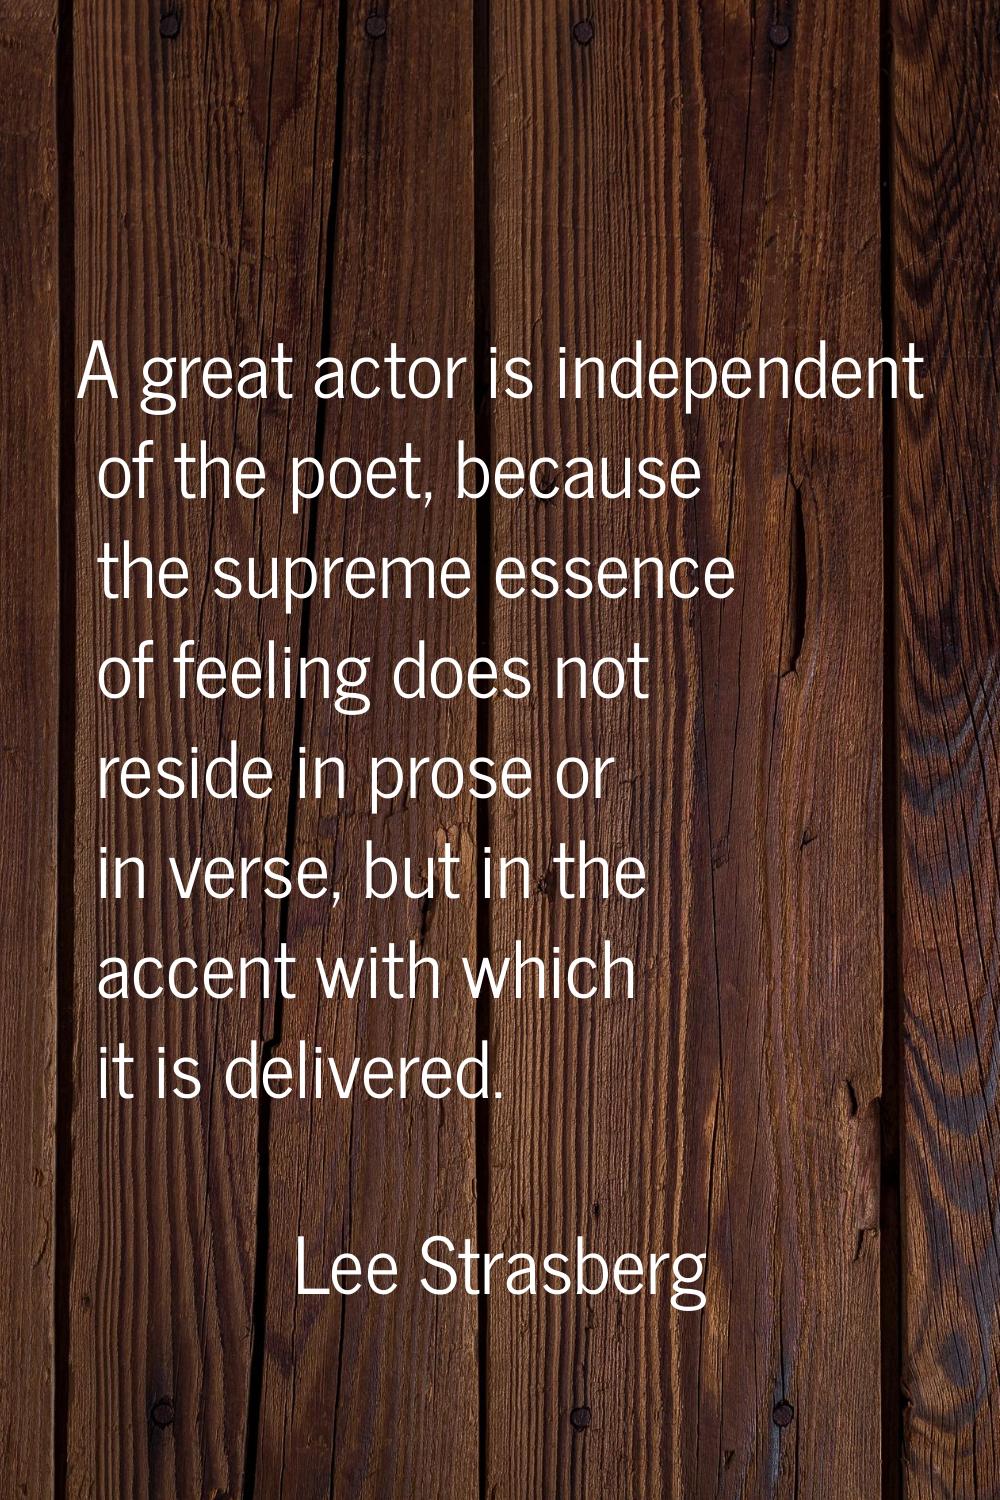 A great actor is independent of the poet, because the supreme essence of feeling does not reside in